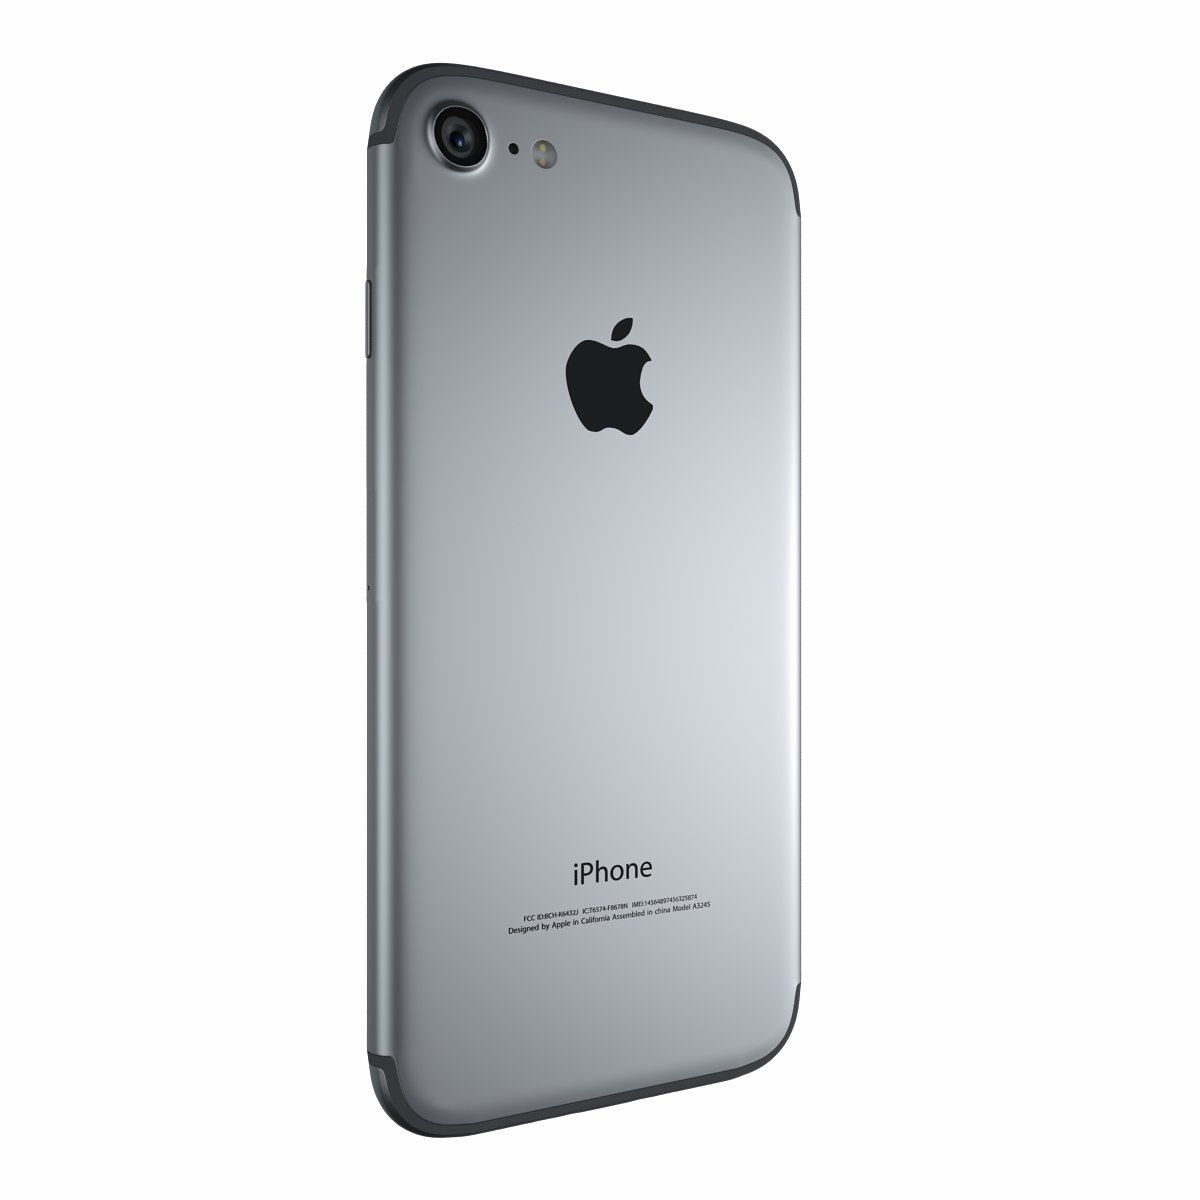 Apple iPhone PNG Images Transparent Free Download.